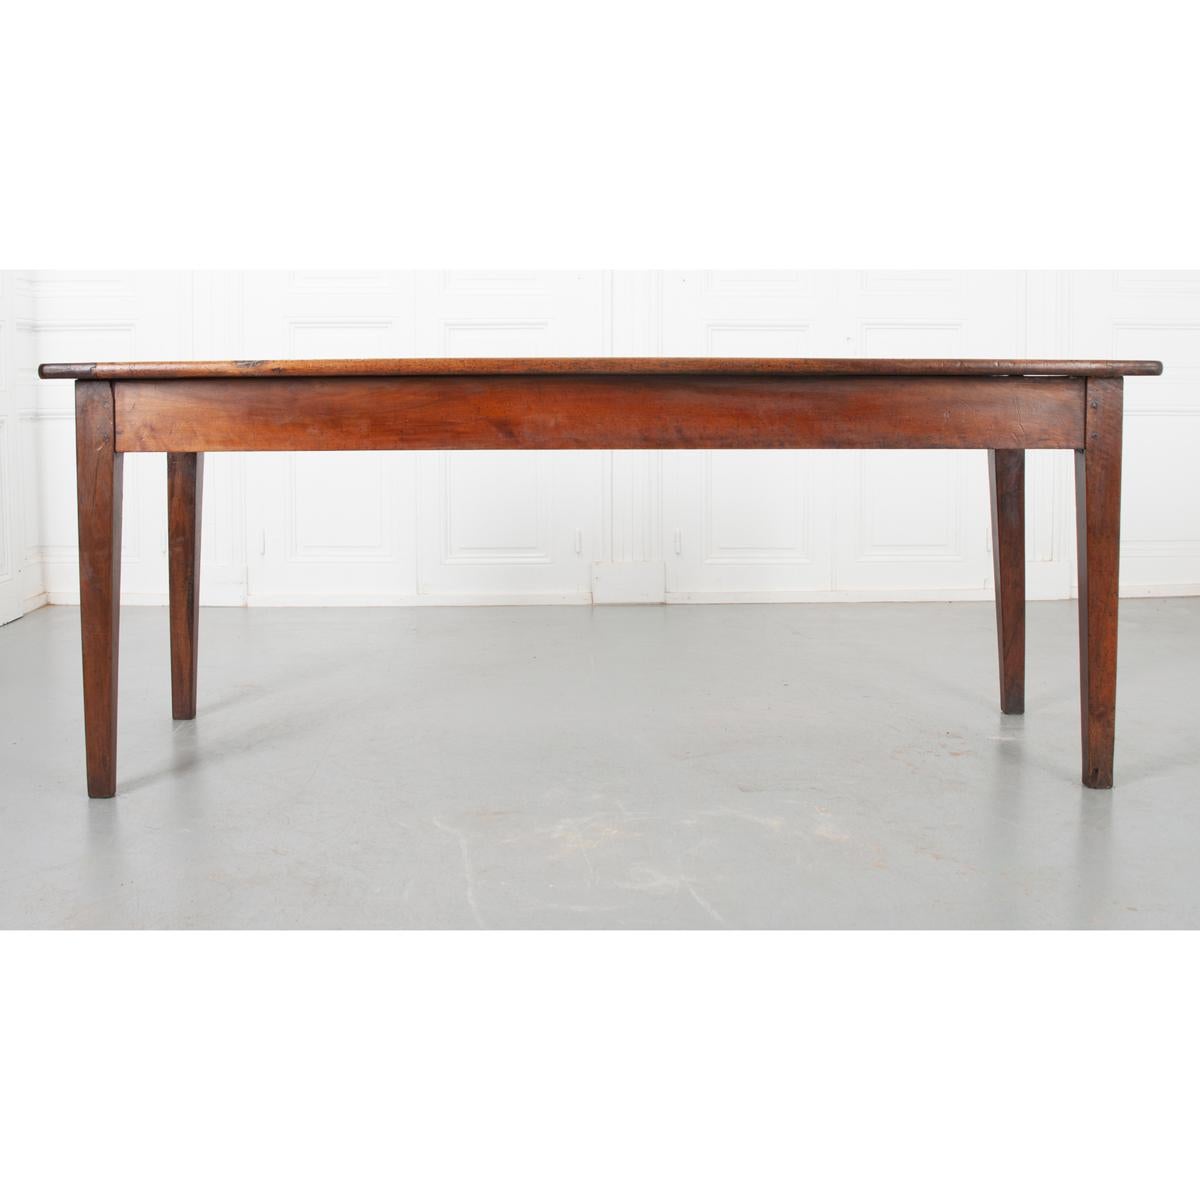 This is a French 19th century walnut dining table. It has one wide plank in the center of the top with smaller planks on either side. The patina is wonderful. It has a nice wide apron with tapered French legs. It is circa 1840.
 